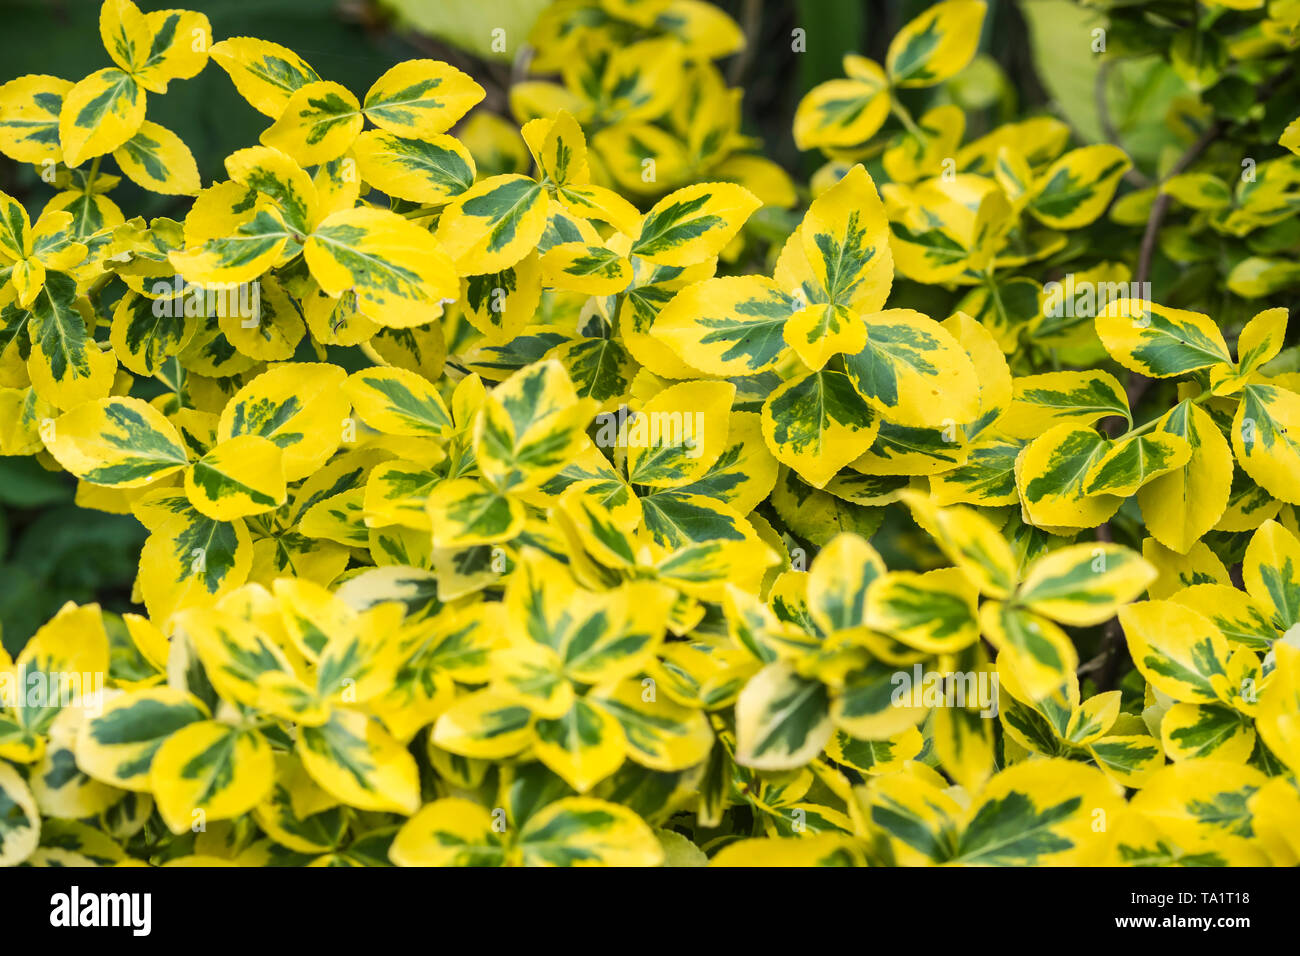 Euonymus, likely Euonymus fortunei 'Emerald and Gold' shrub with variegated green and yellow foliage leaves. in Spring (May) in West Sussex, UK. Stock Photo